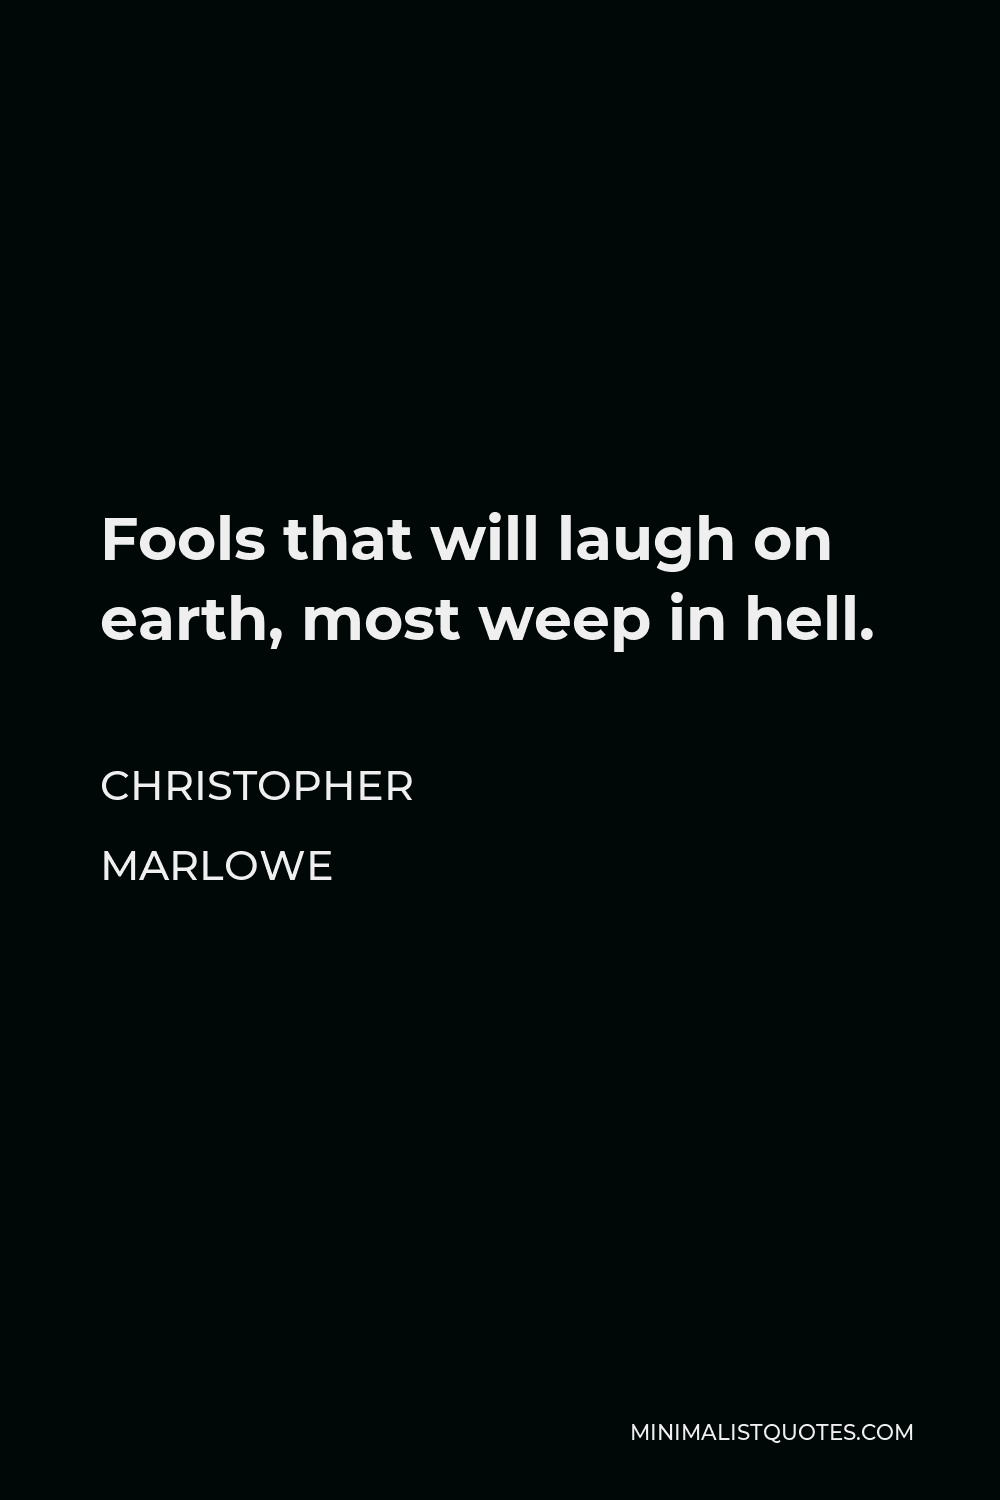 Christopher Marlowe Quote - Fools that will laugh on earth, most weep in hell.